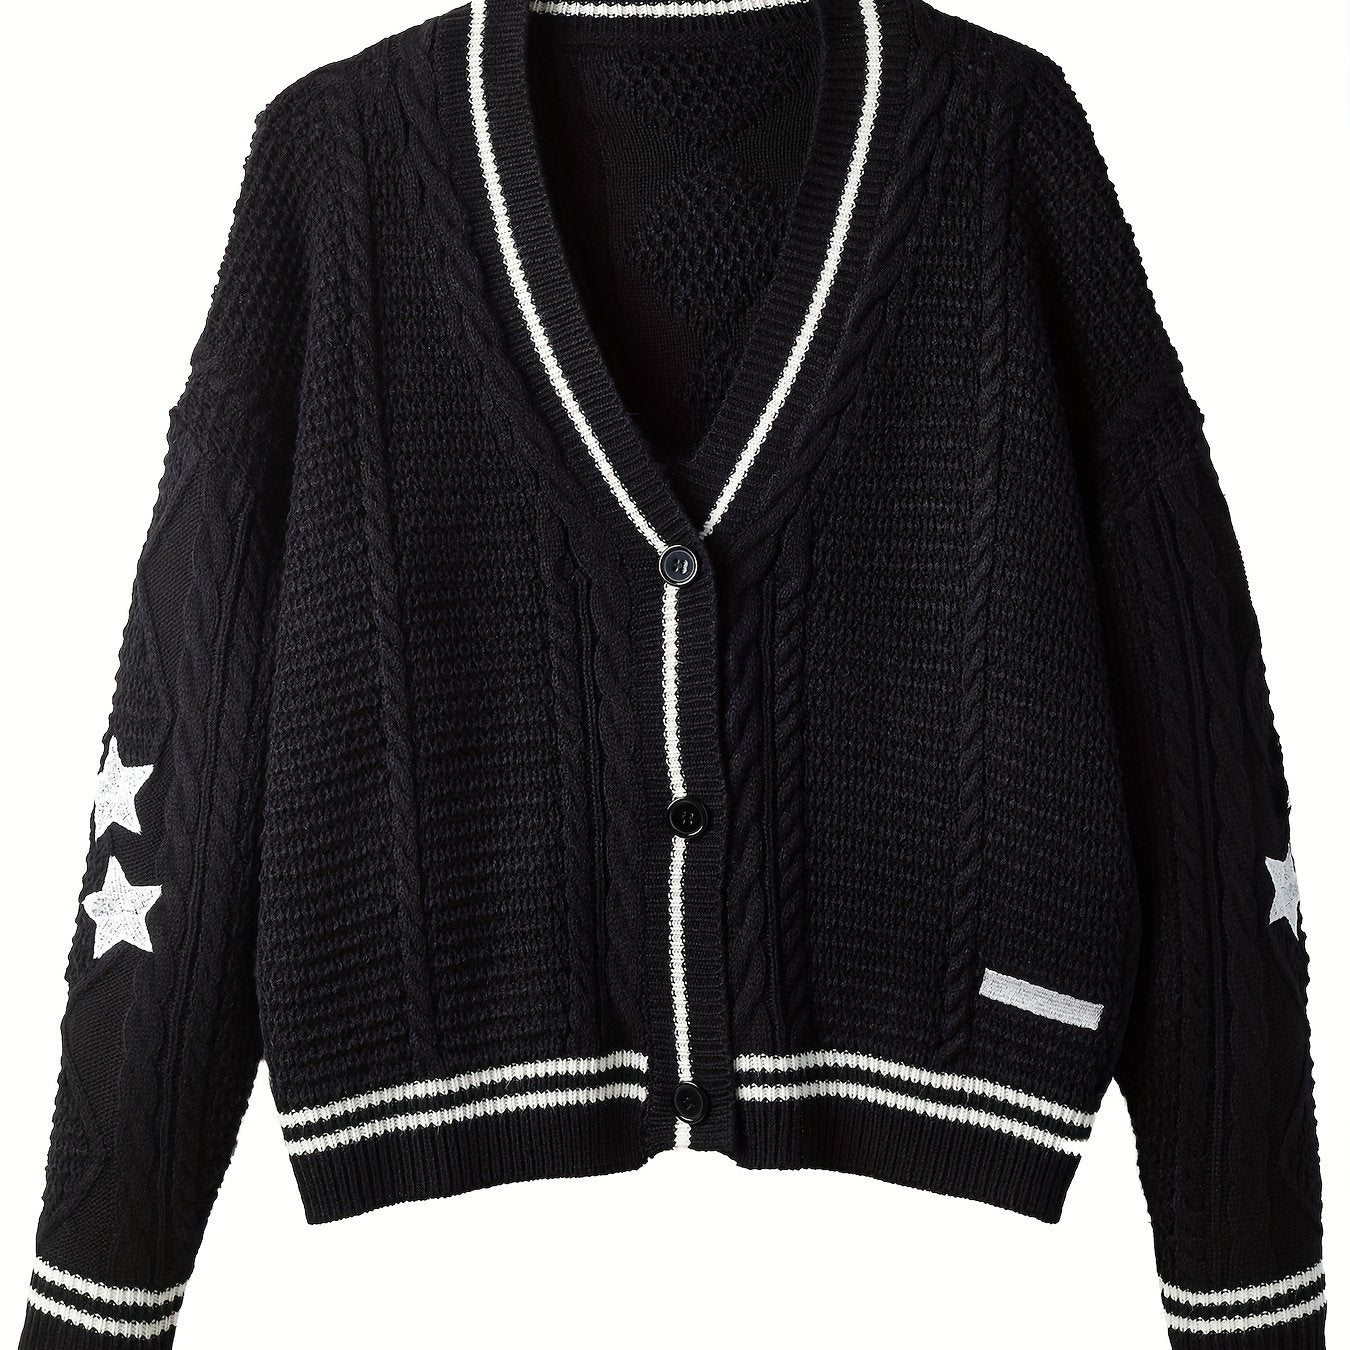 vlovelaw  Star Pattern Contrast Side Cardigan, Casual Long Sleeve Cardigan For Fall & Winter, Women's Clothing